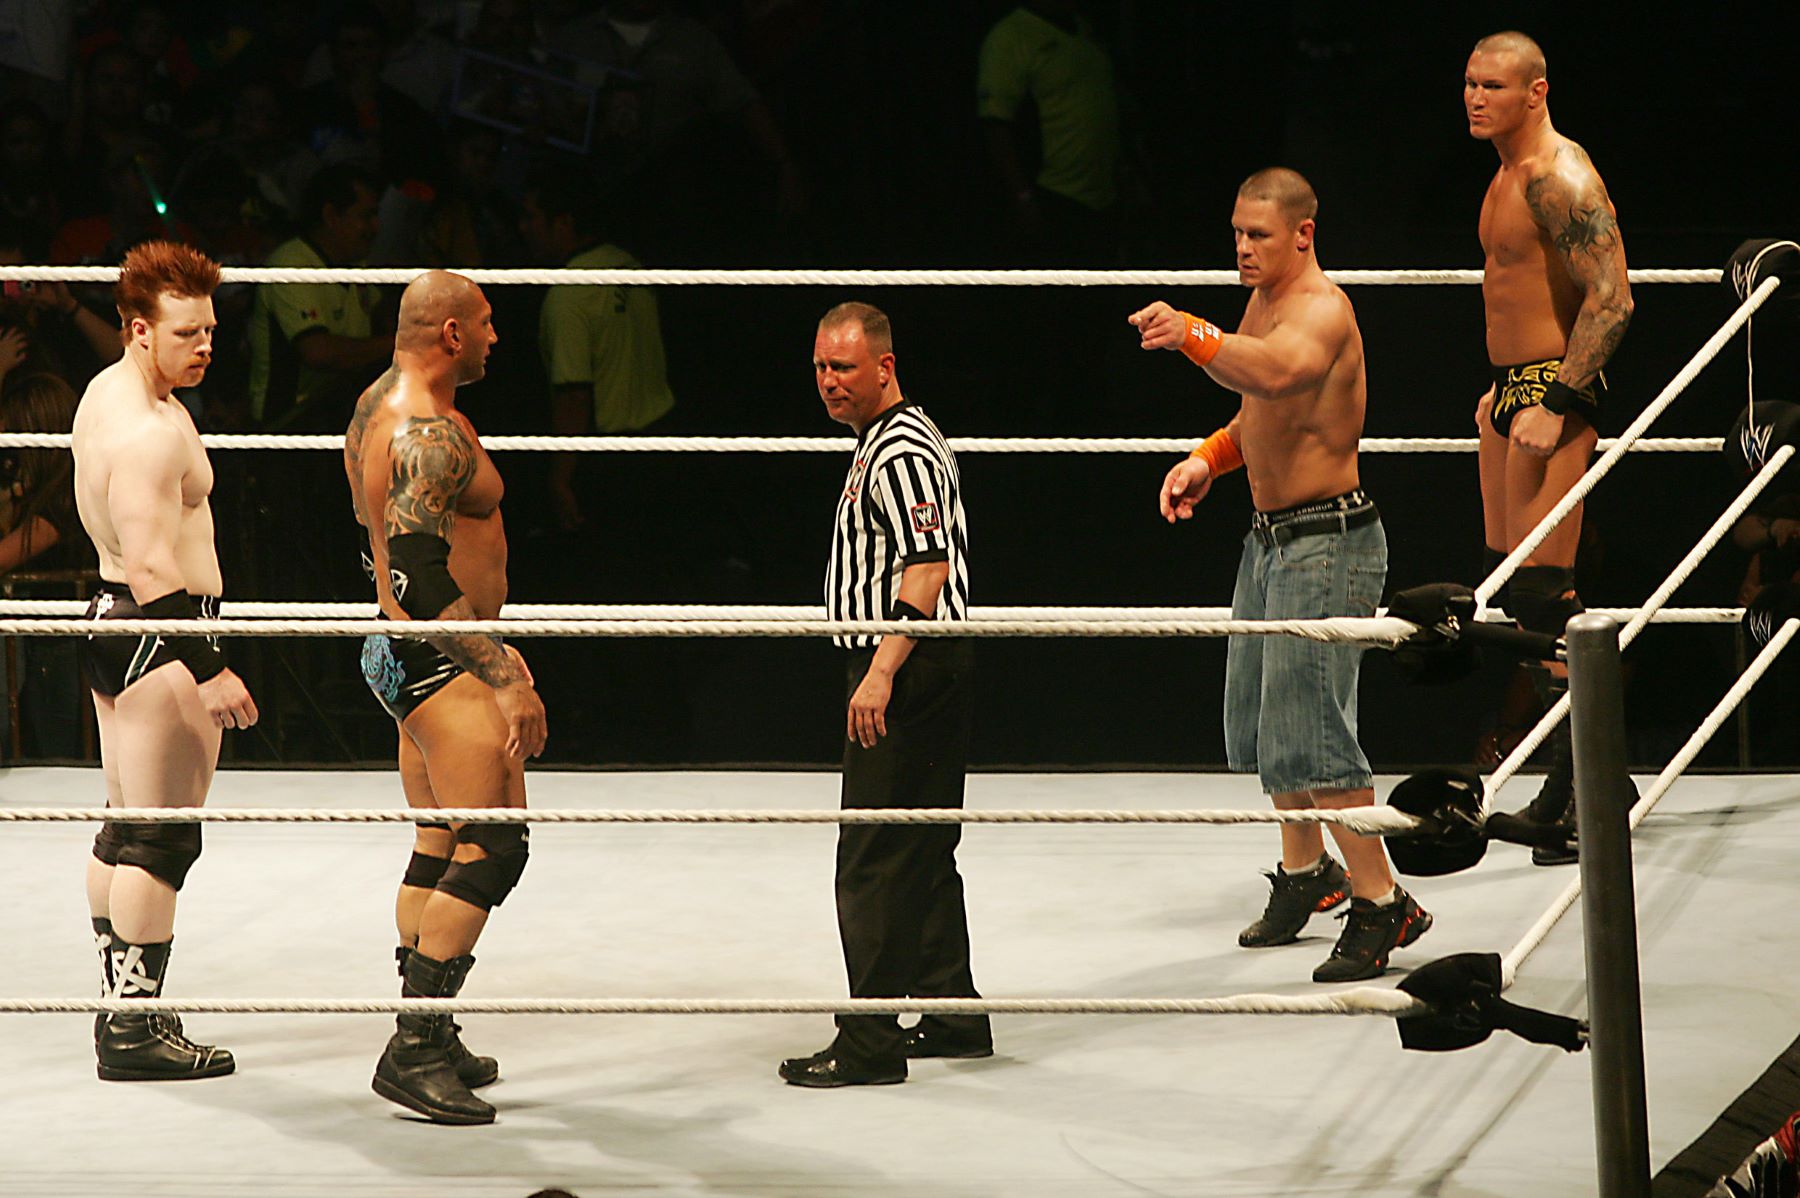 Dave Bautista and John Cena during a WWE RAW wrestling event